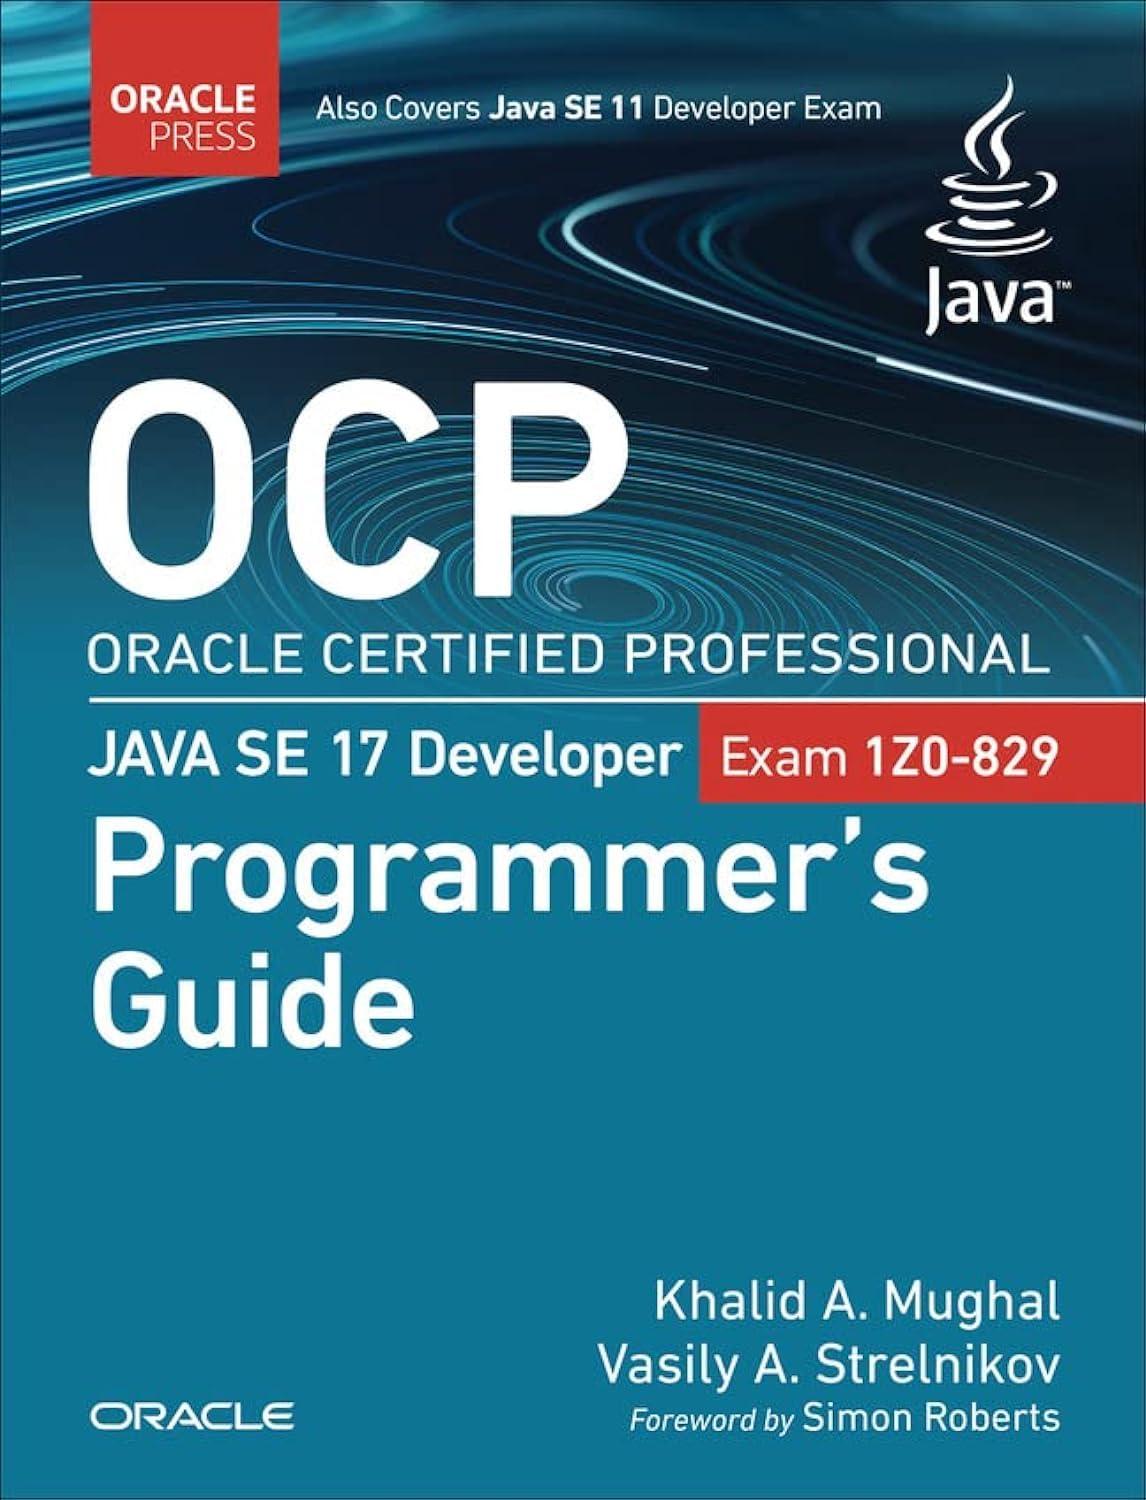 ocp oracle certified professional java se 17 developer exam 1z0-829 programmer's guide oracle press for java